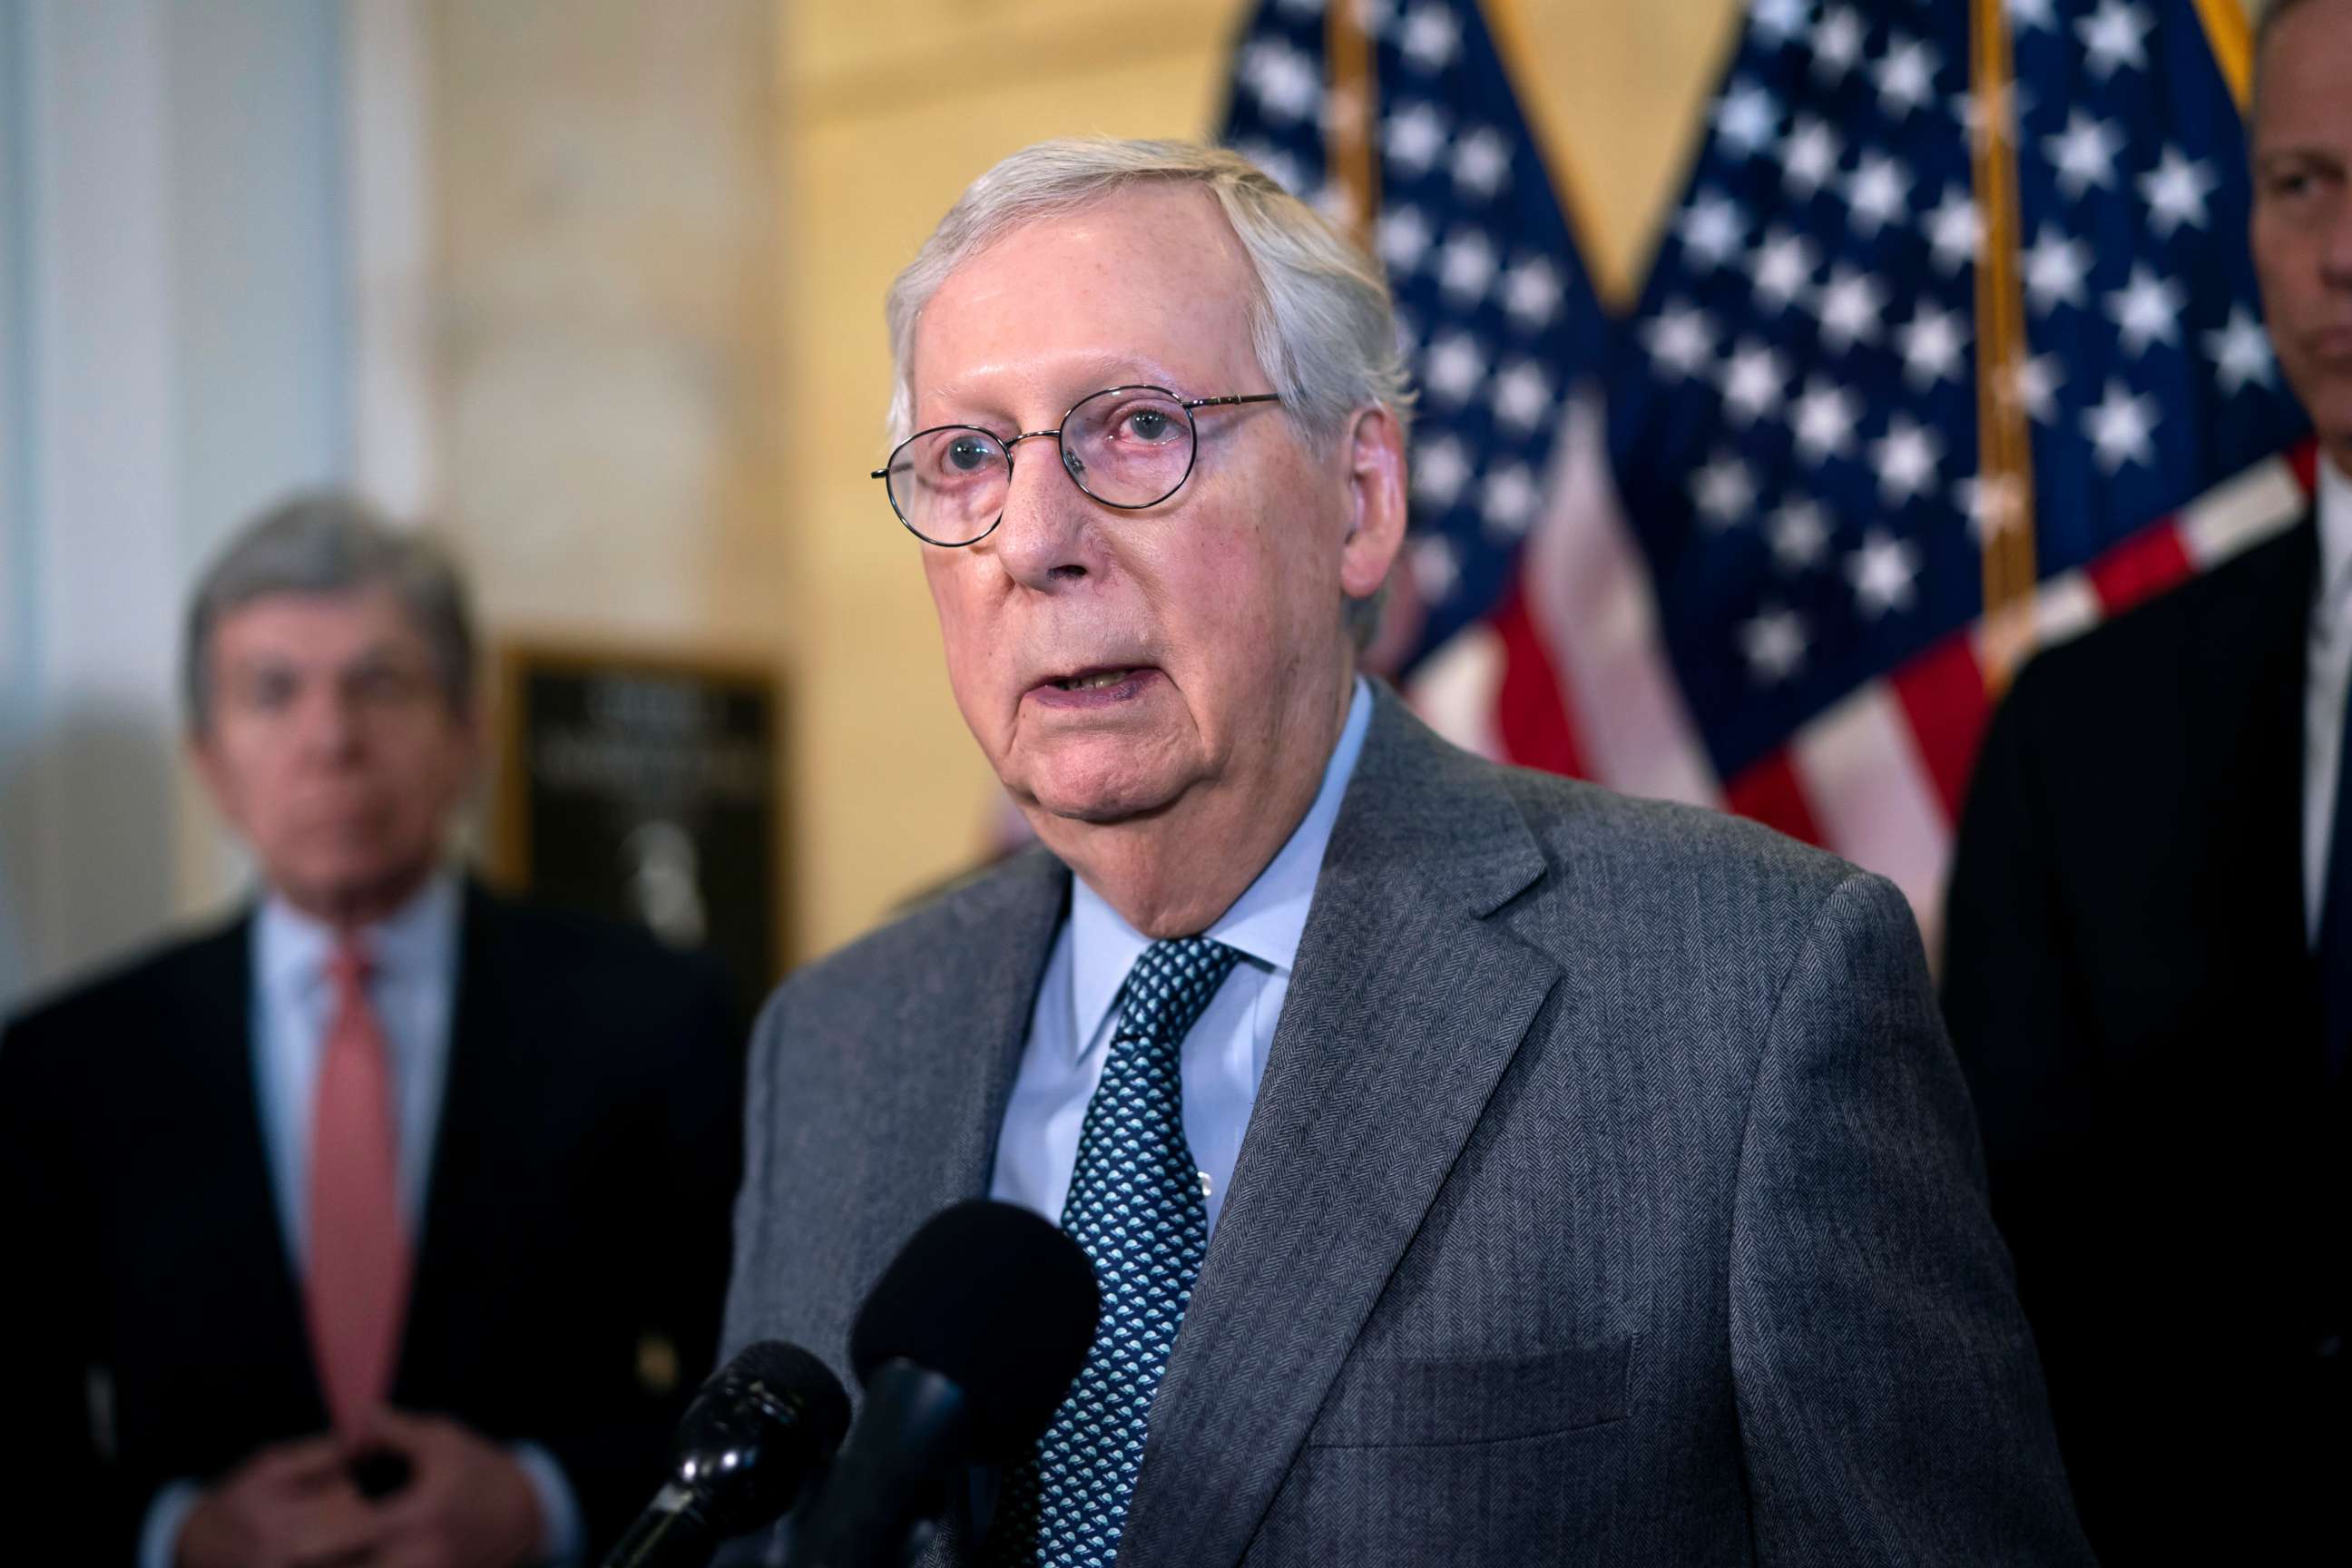 PHOTO: Senate Minority Leader Mitch McConnell speaks to reporters after a Republican strategy meeting at the Capitol in Washington, Feb. 15, 2022.